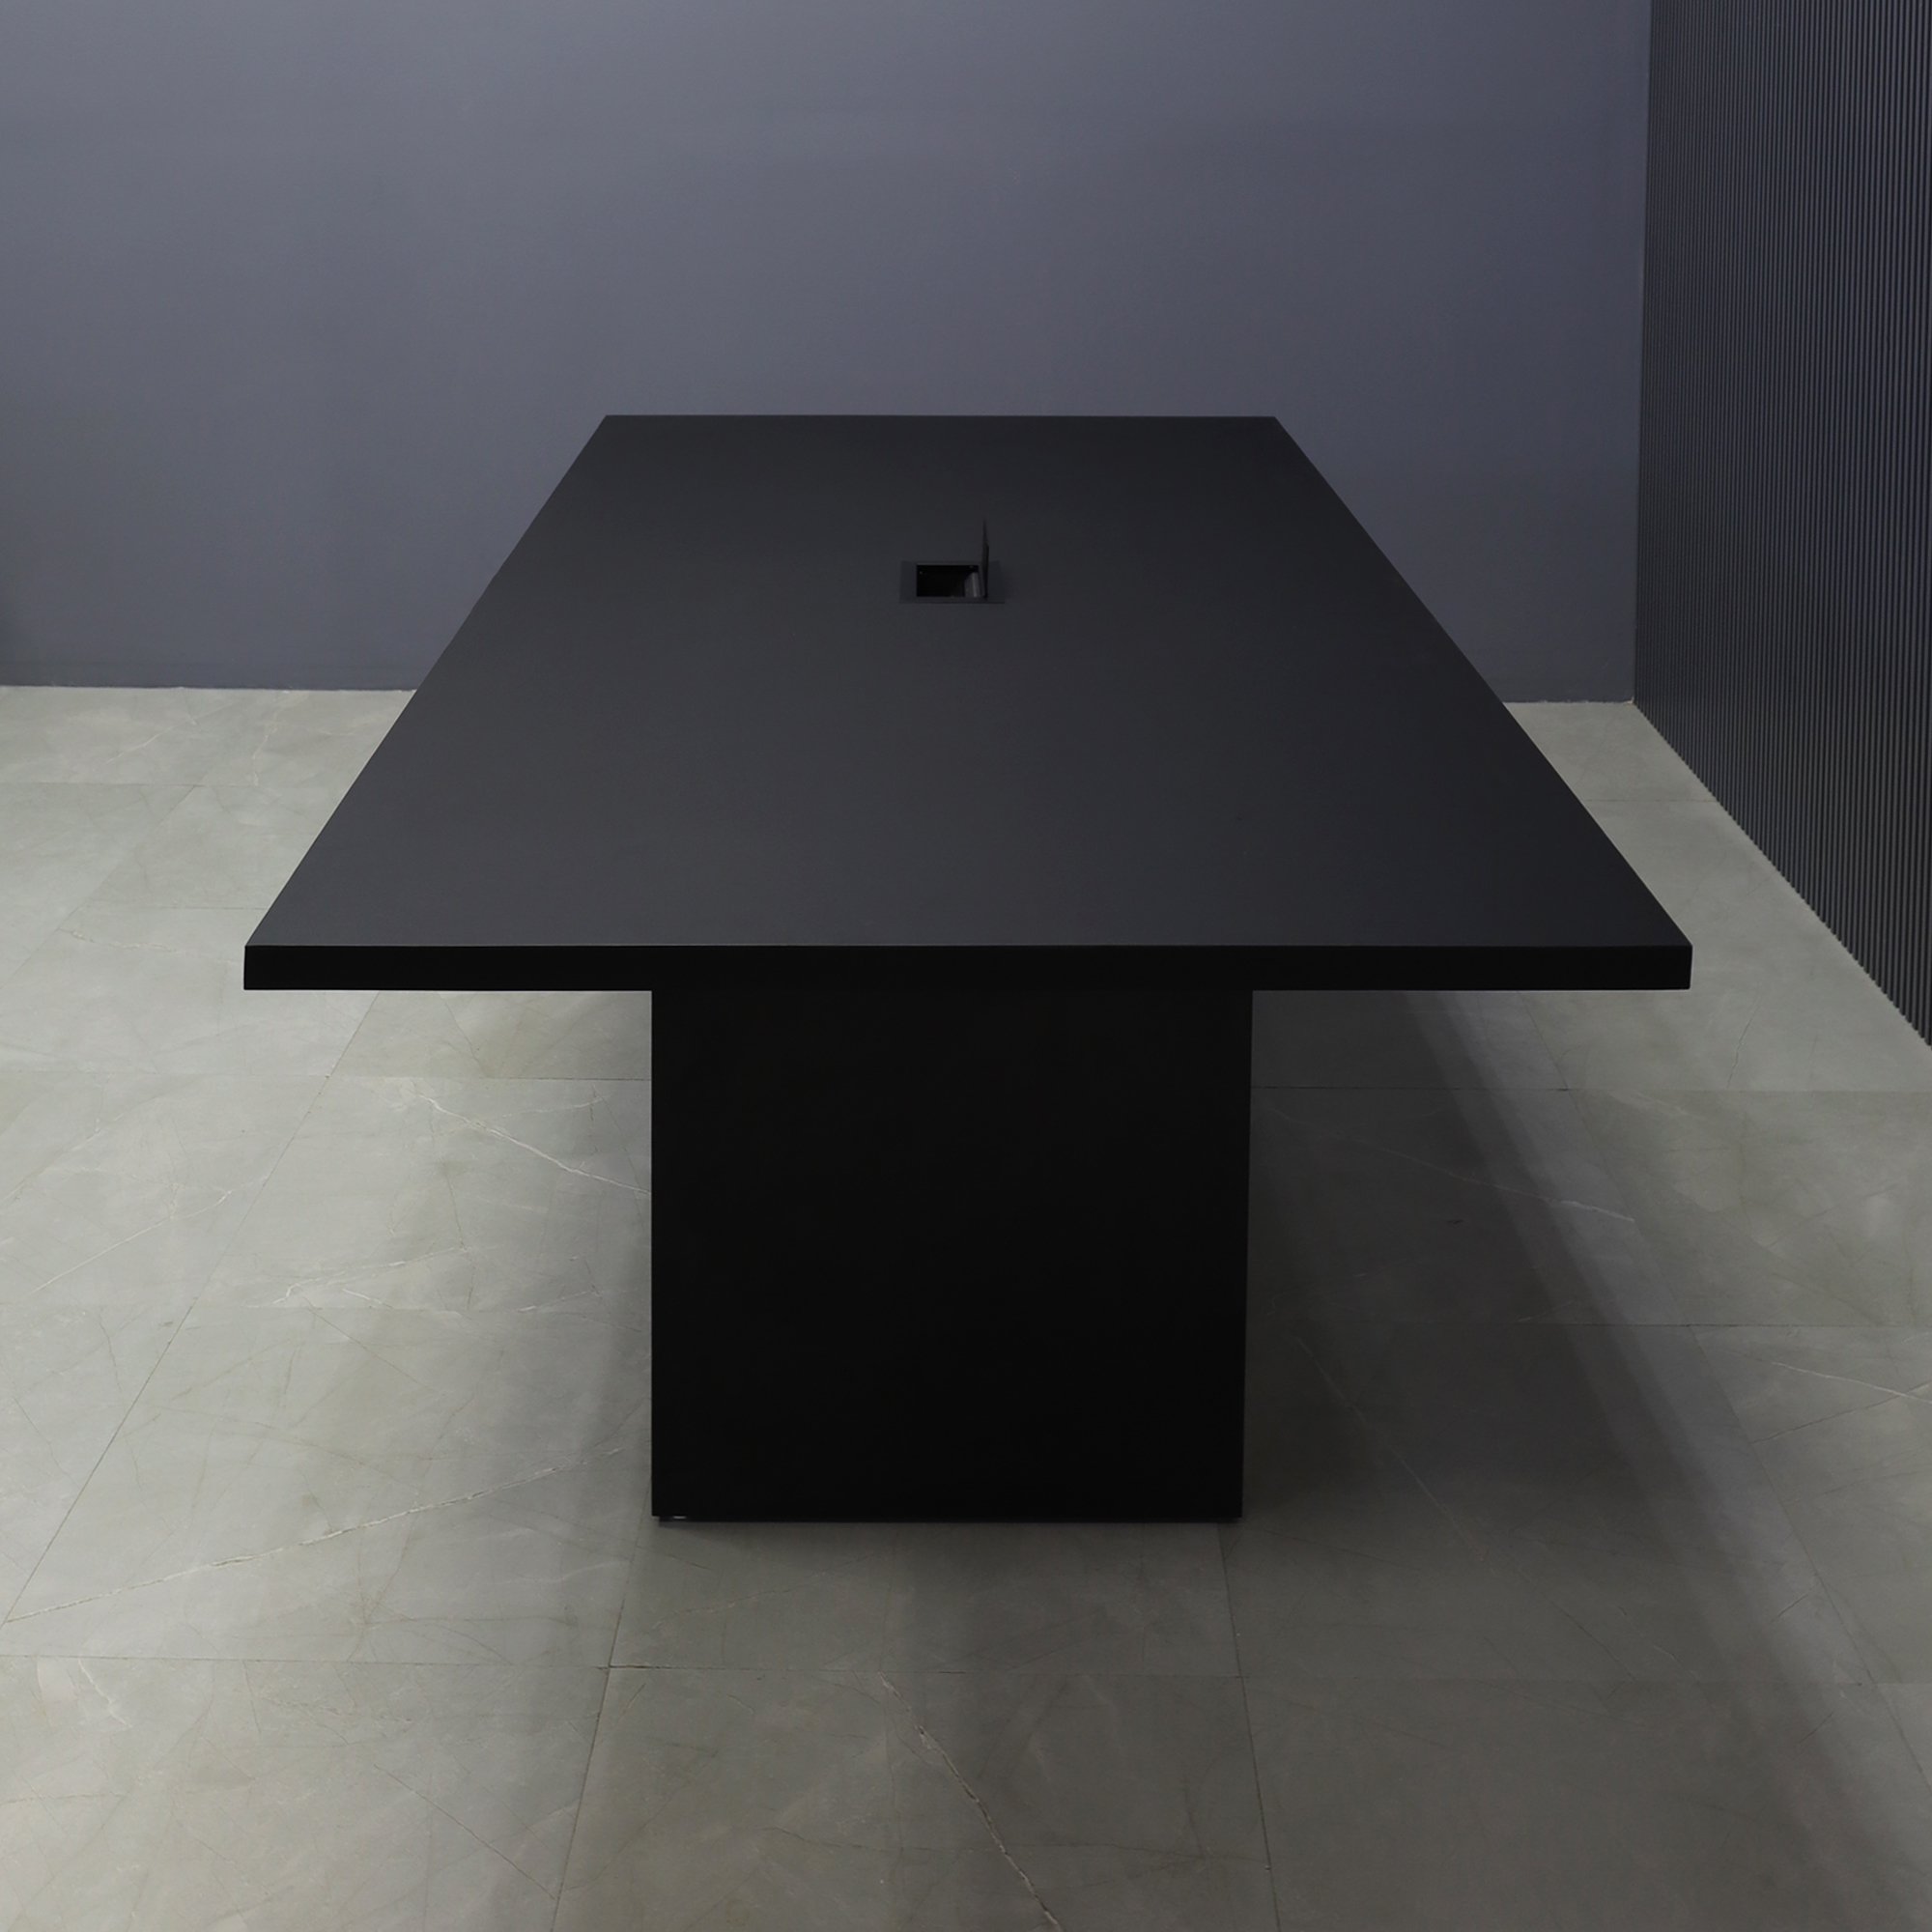 90-inch Newton Rectangular Conference Table in black traceless laminate top and  standard base, with black MX3 powerbox, shown here.